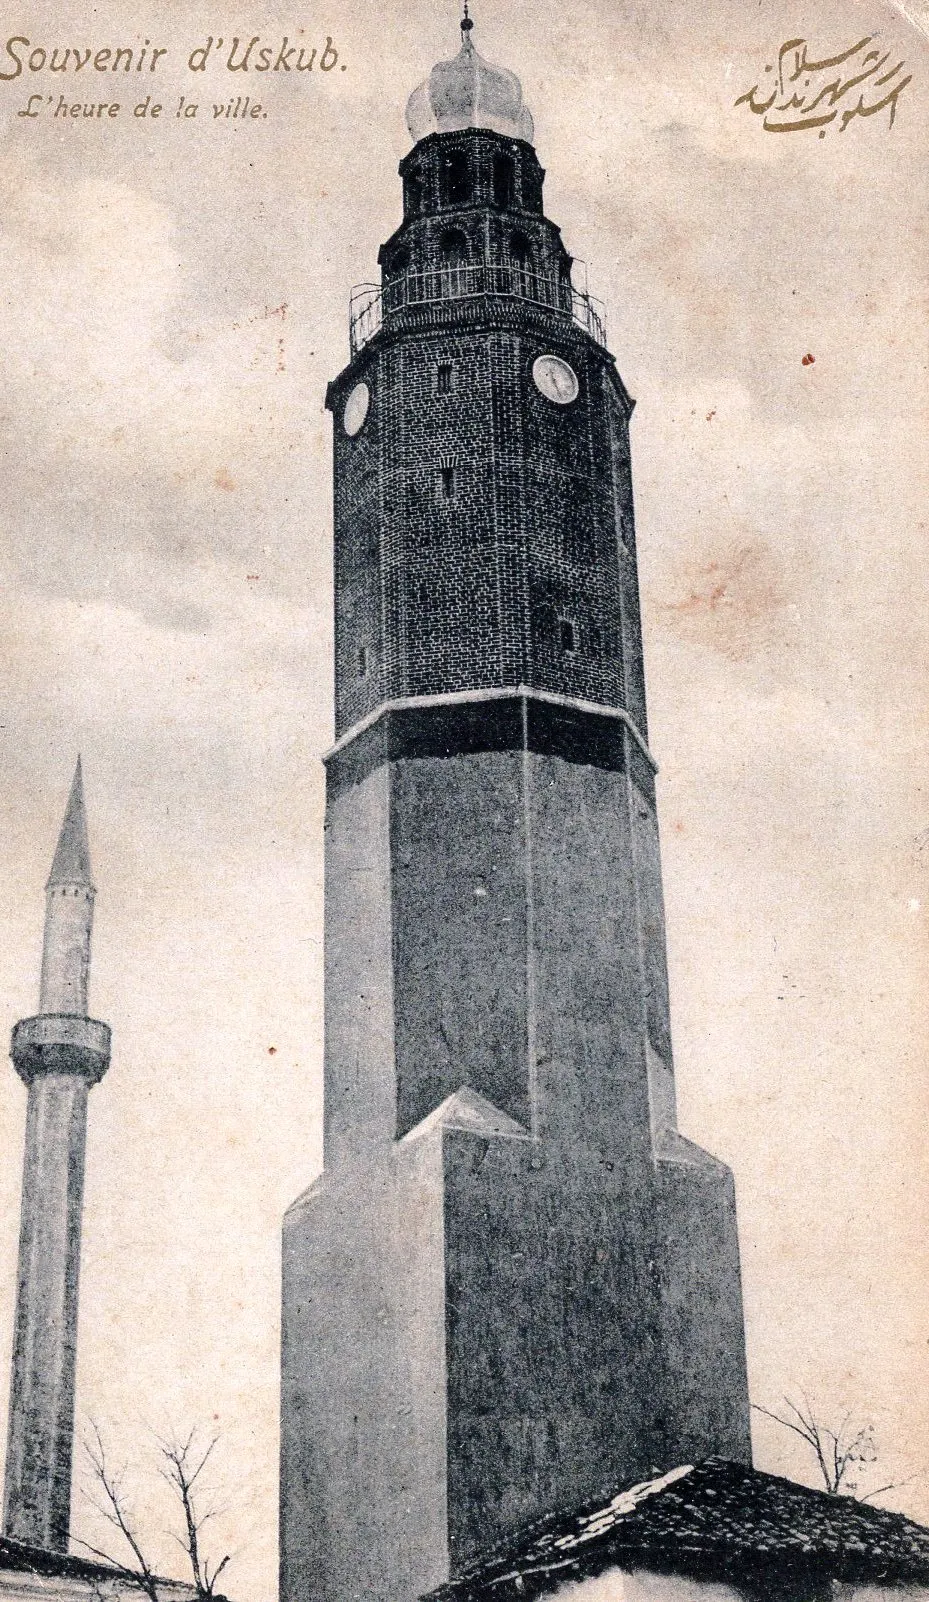 Photo showing: Postcard of Skopje with Clock Tower, 1909

This media file is produced by Wikipedian in Residence in Category:Wikipedian in Residence at DARM in 2016.